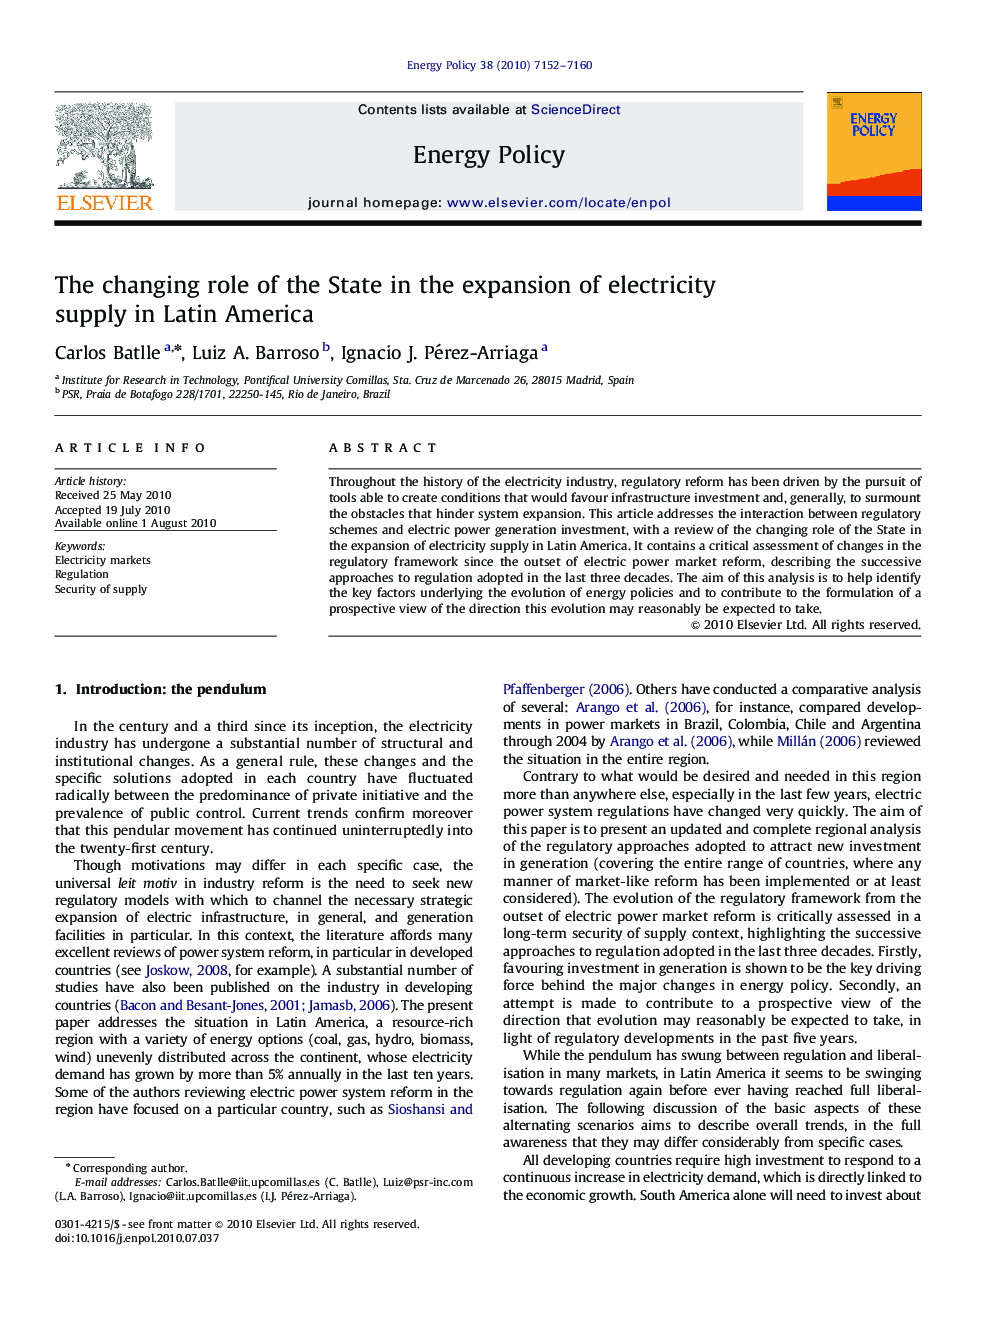 The changing role of the State in the expansion of electricity supply in Latin America